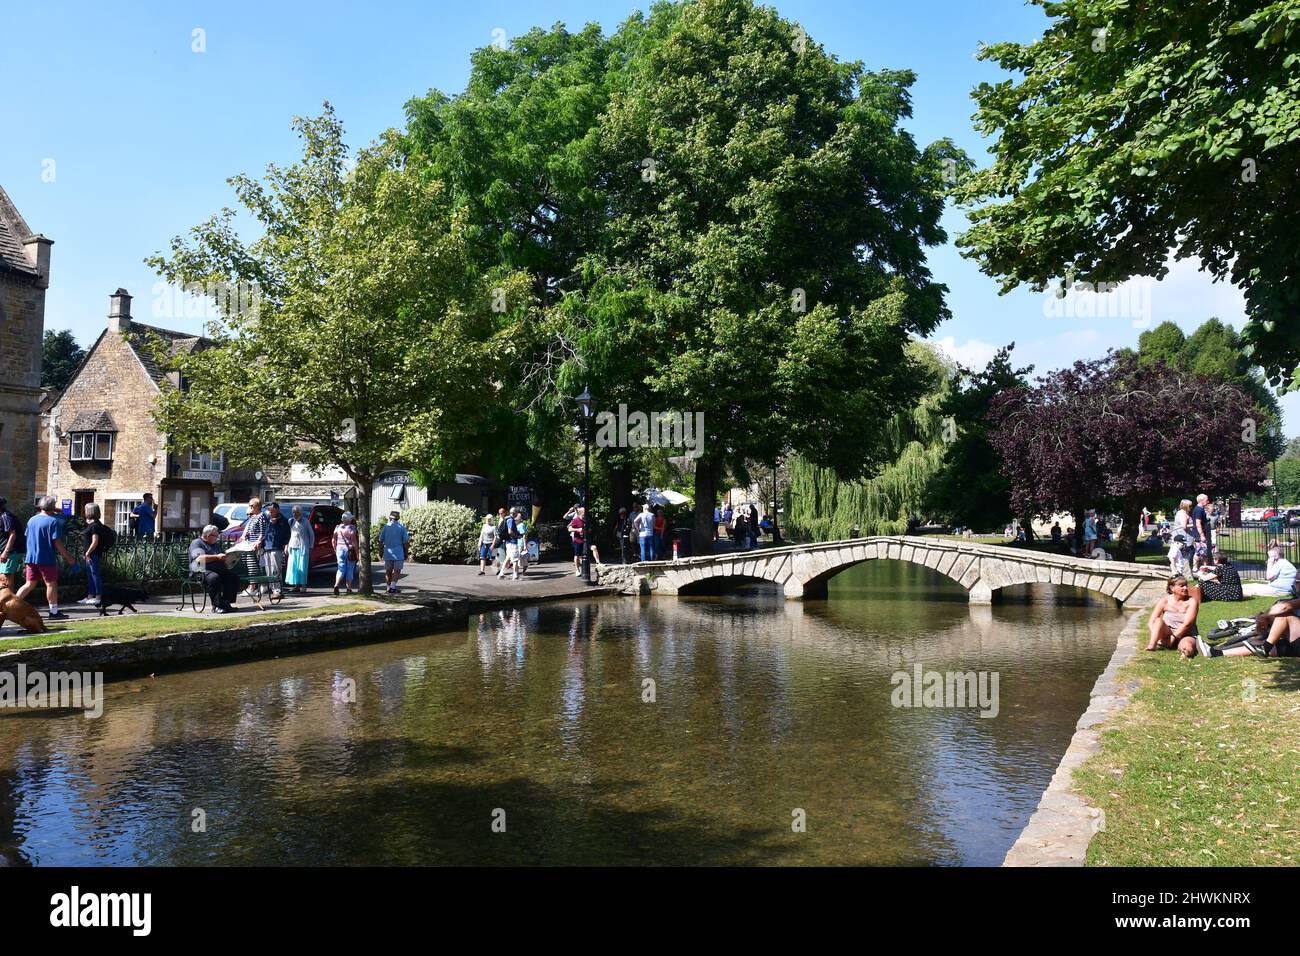 Bourton-on-the-water, Gloucestershire, Cotswolds, UK Stock Photo